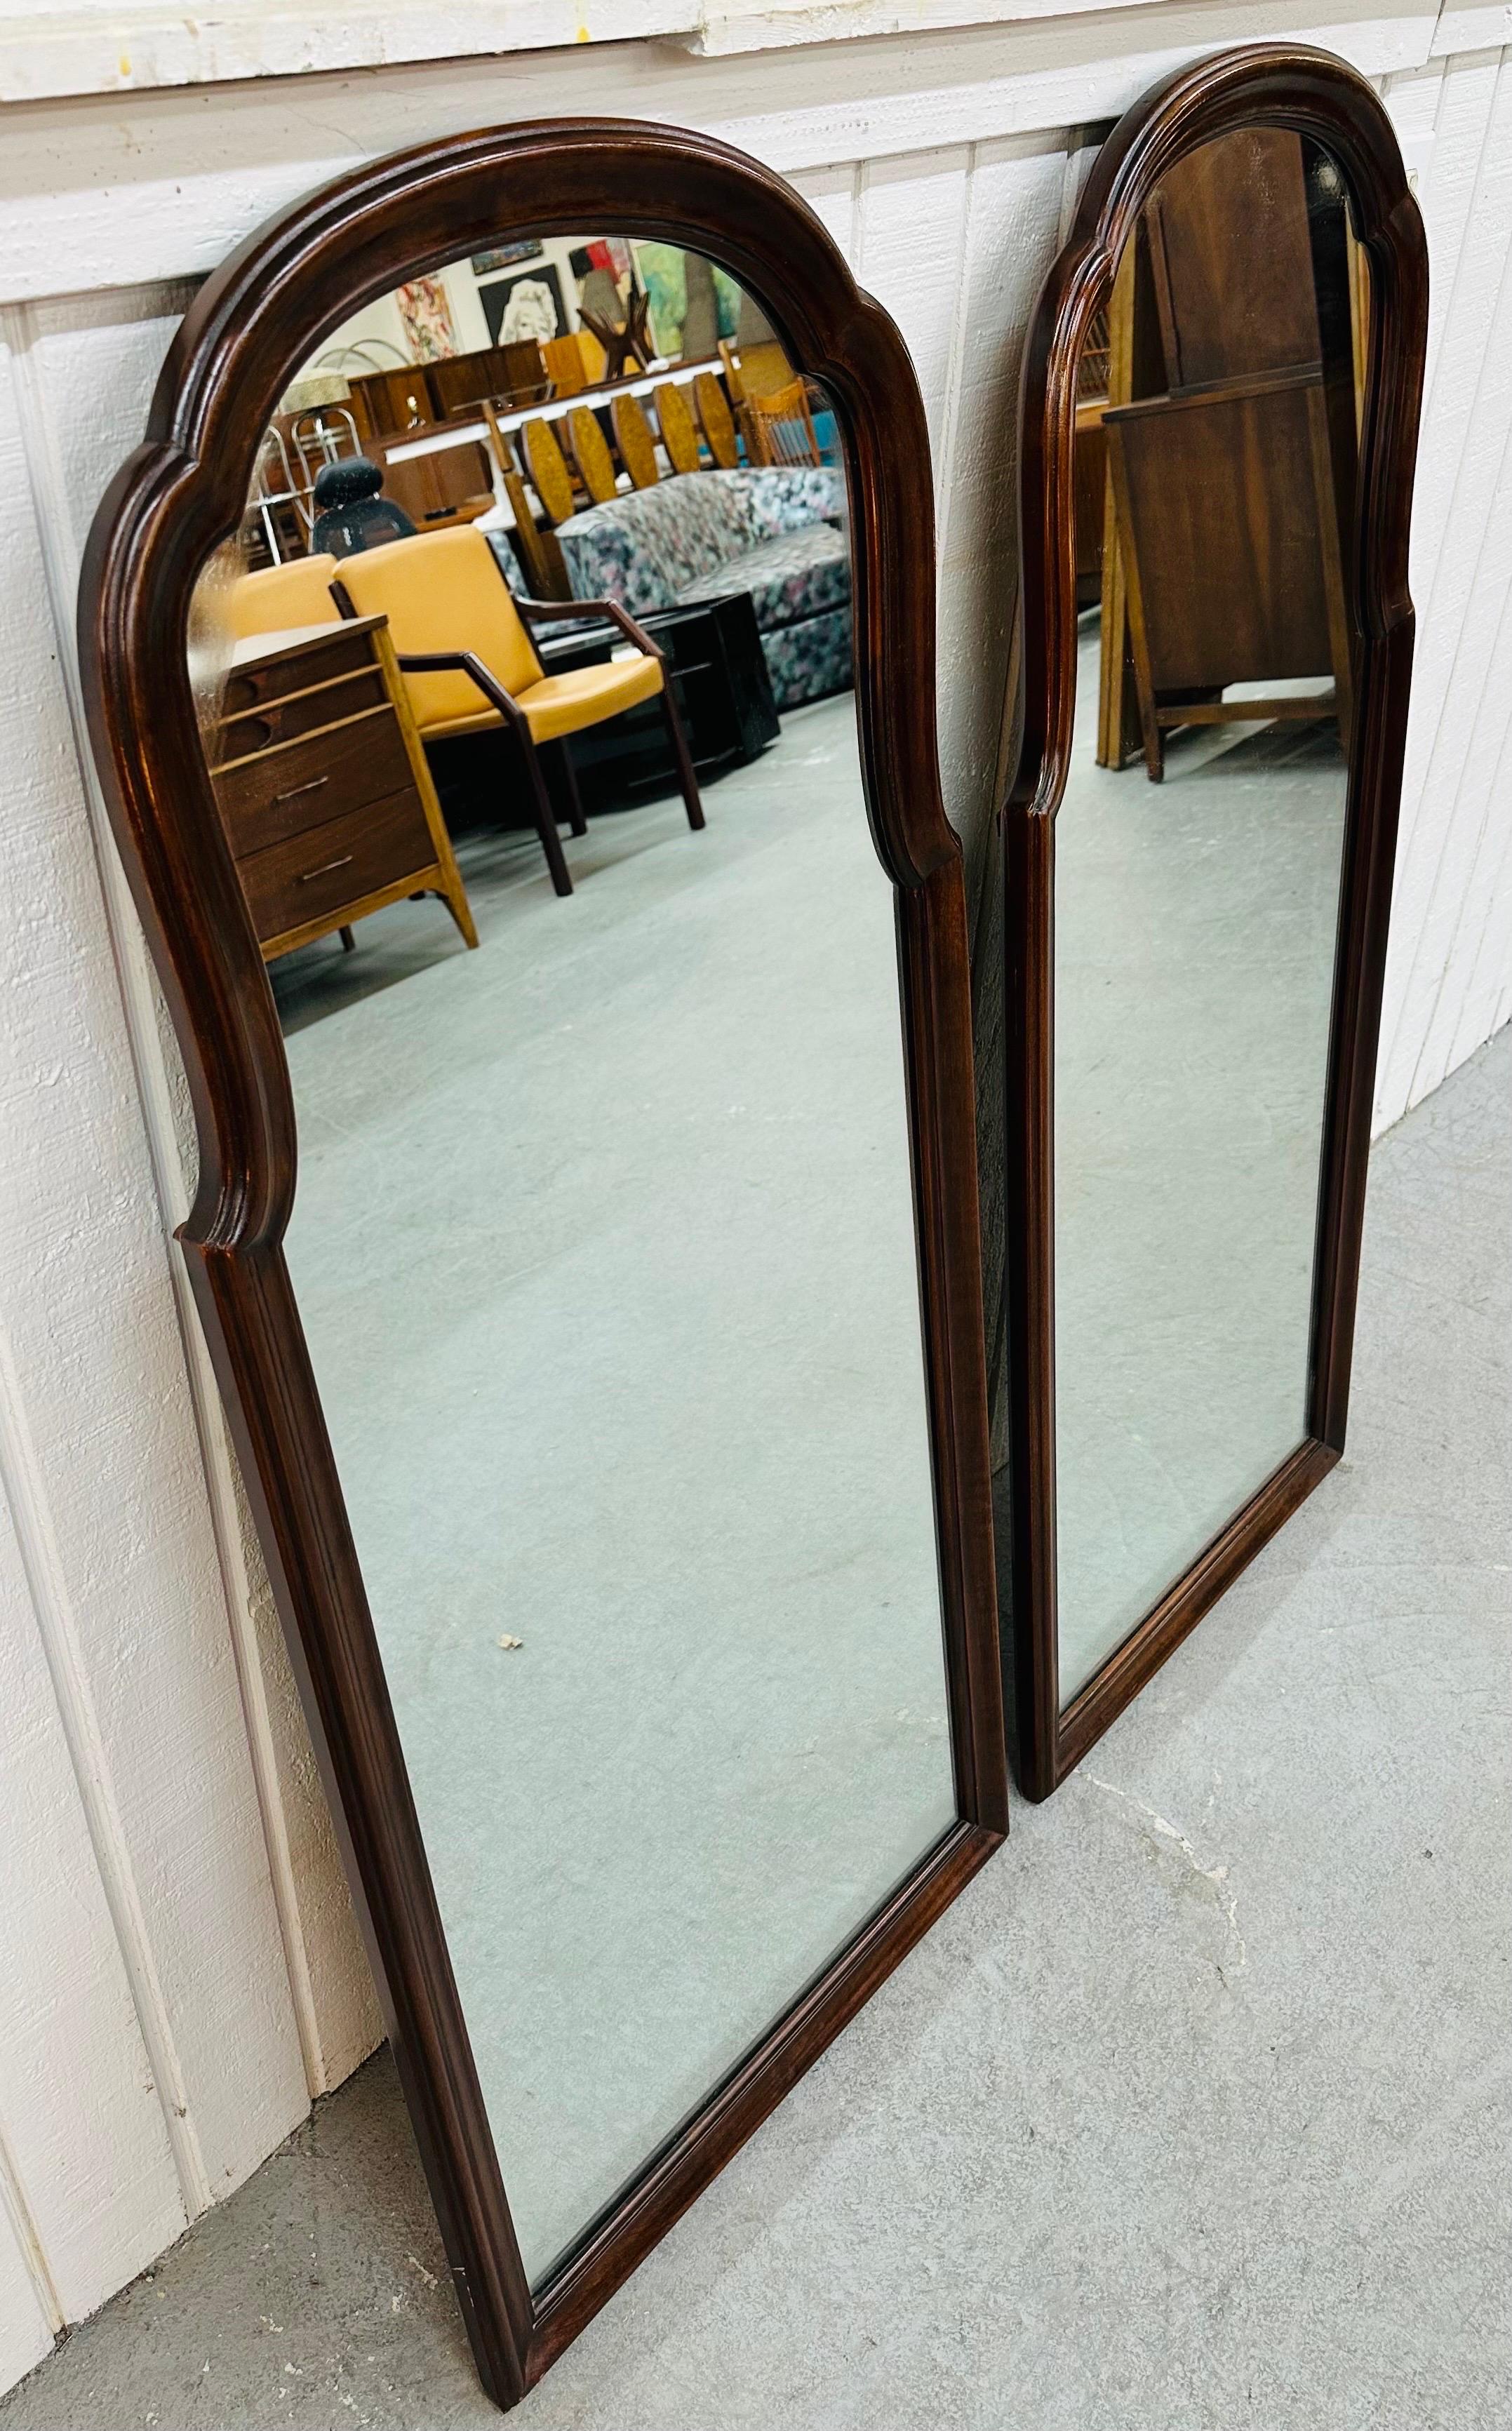 This listing is for a pair of vintage Drexel Heritage Mahogany Wall Mirrors. Featuring an antique style design, solid cherry wood frames, and a beautiful mahogany finish. This is an exceptional combination of quality and design by Drexel Heritage!